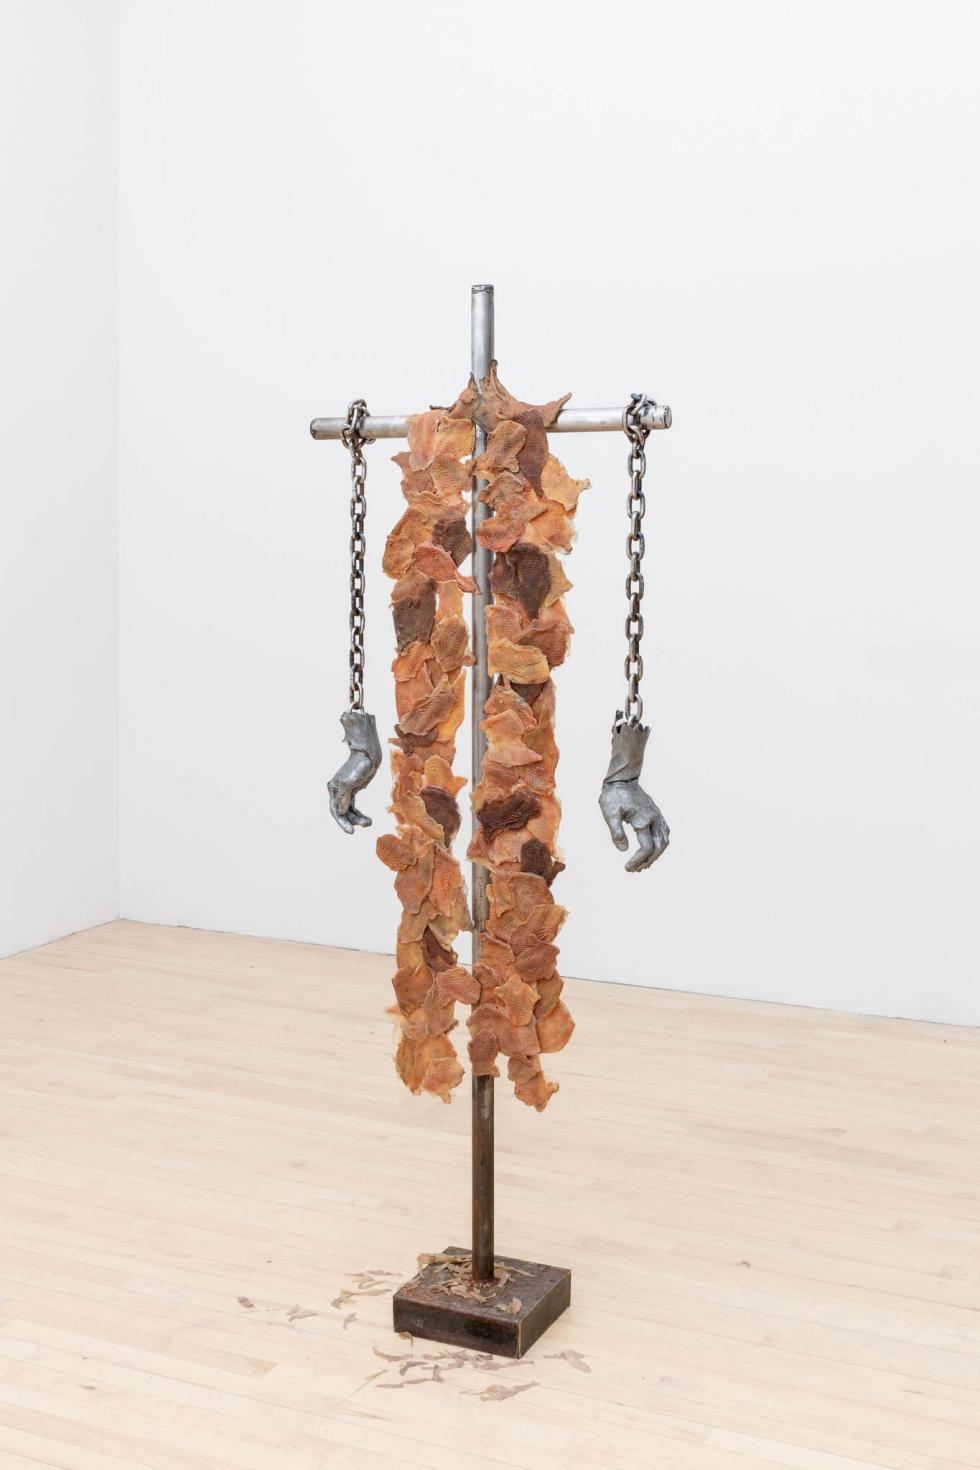 Steel cross with two steel casted hands hanging on either side on a chain with a shall of silicone chicken skins around it.